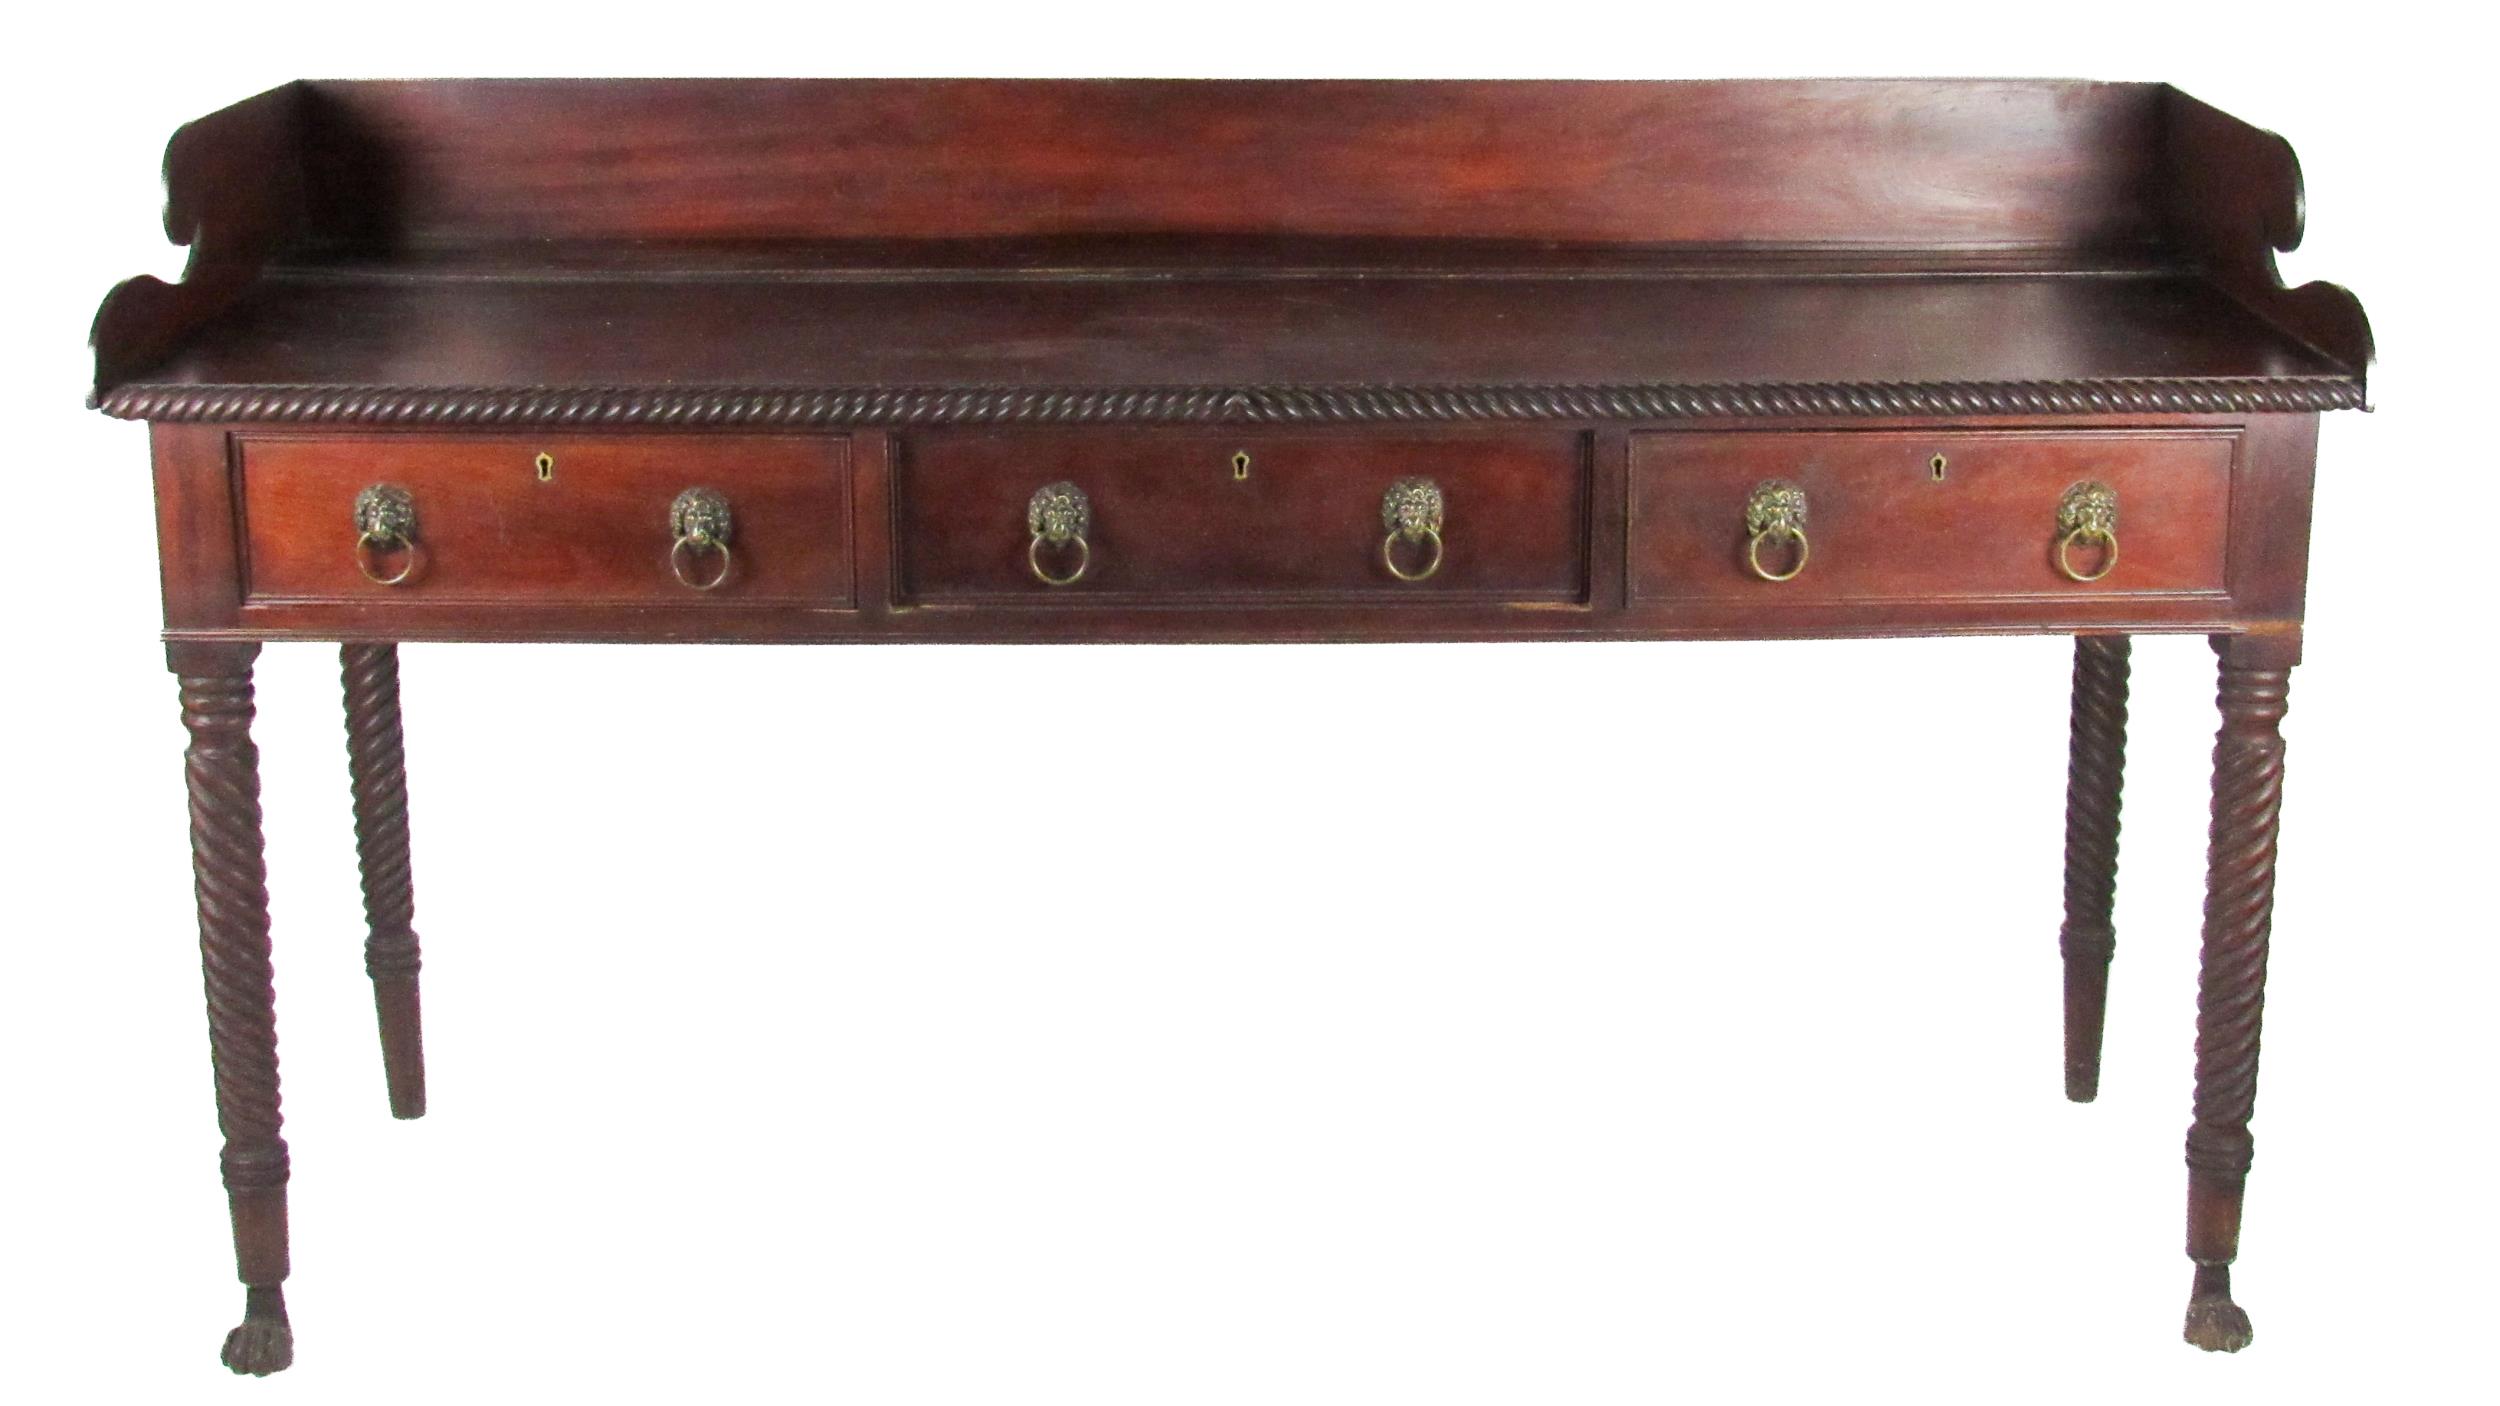 A William IV Nelson type mahogany Serving Table, the gallery back with scroll side over a rope edge,